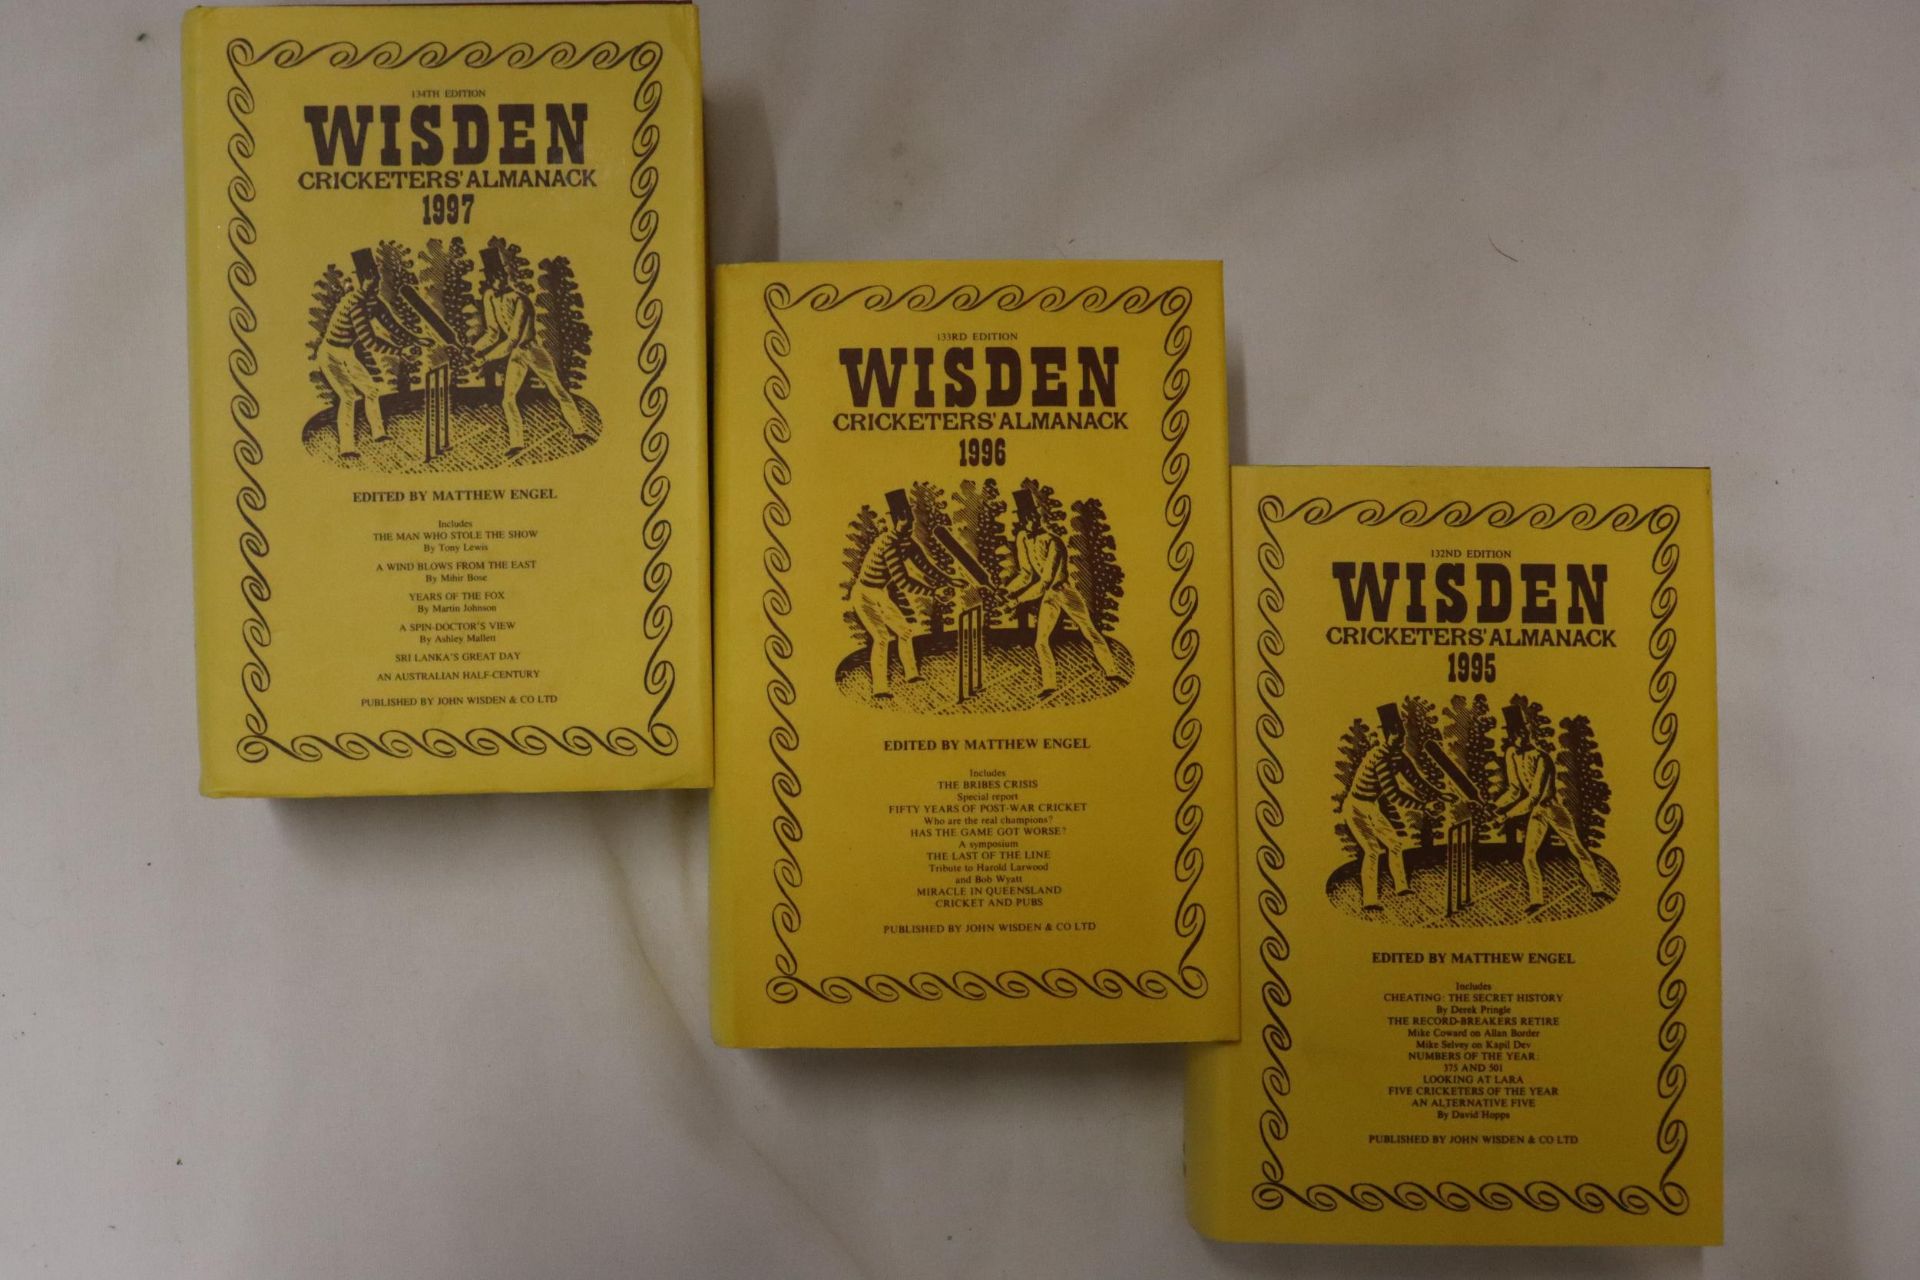 THREE HARDBACK COPIES OF WISDEN'S CRICKETER'S ALMANACKS, 1995, 1996 AND 1997. THESE COPIES ARE IN